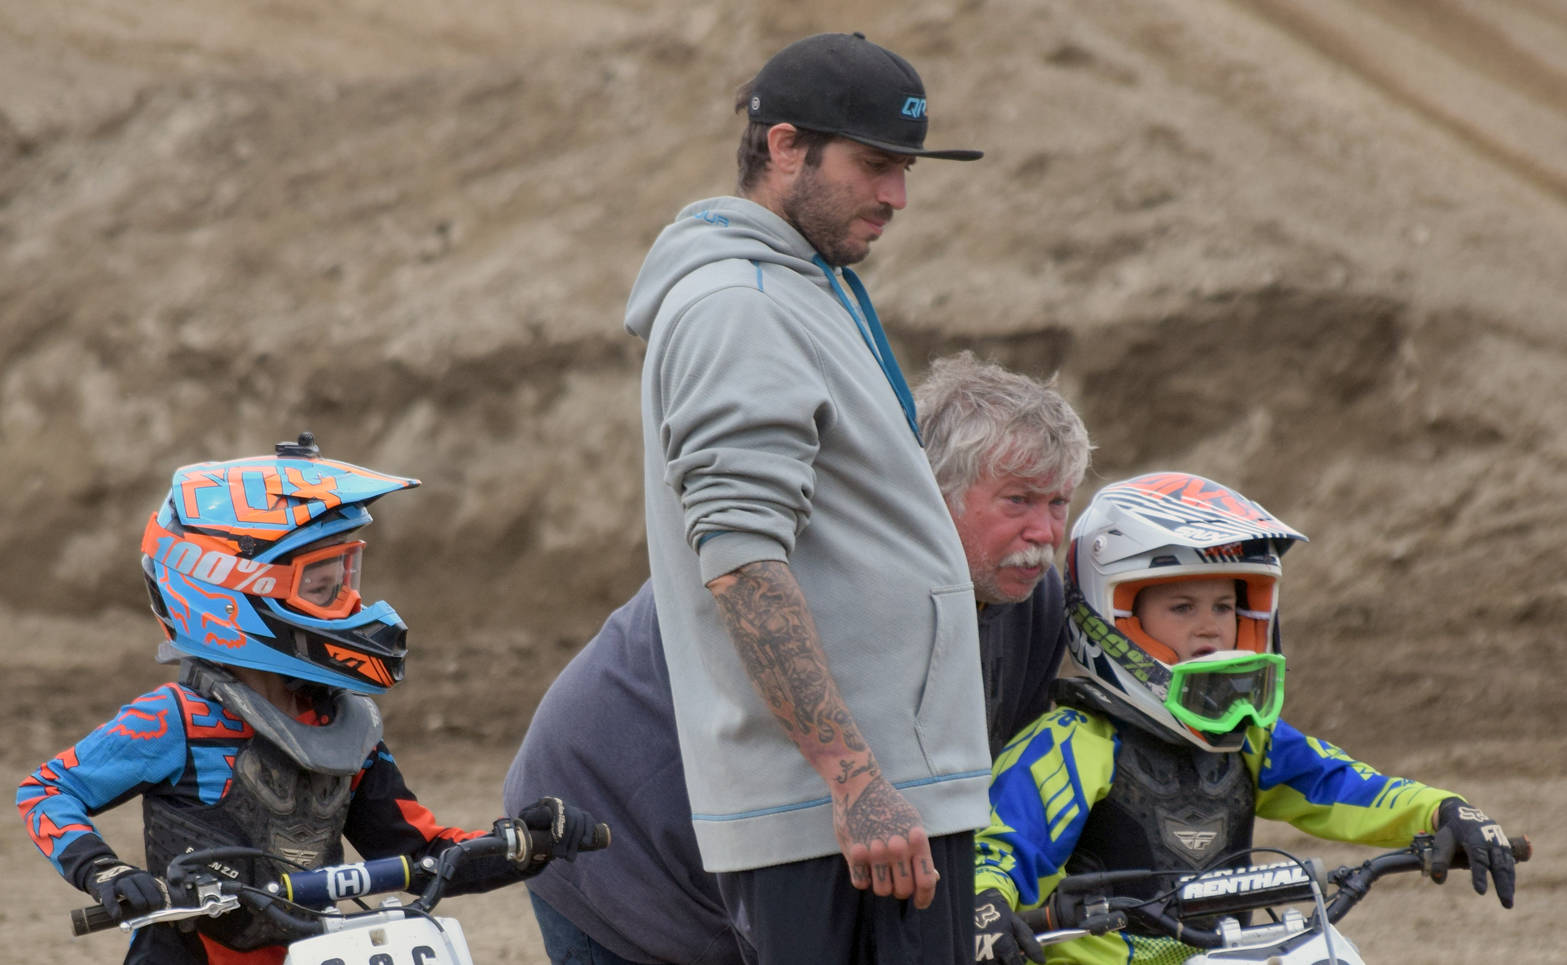 From left, Draiden Mullican; Draiden’s father, Shane; Draiden’s grandfather, John; and Draiden’s cousin, Kash Williams, get ready for the 50cc race at the Alaska State Motocross Championships on Sunday, June 17, 2018, at Twin City Raceway. (Photo by Jeff Helminiak/Peninsula Clarion)